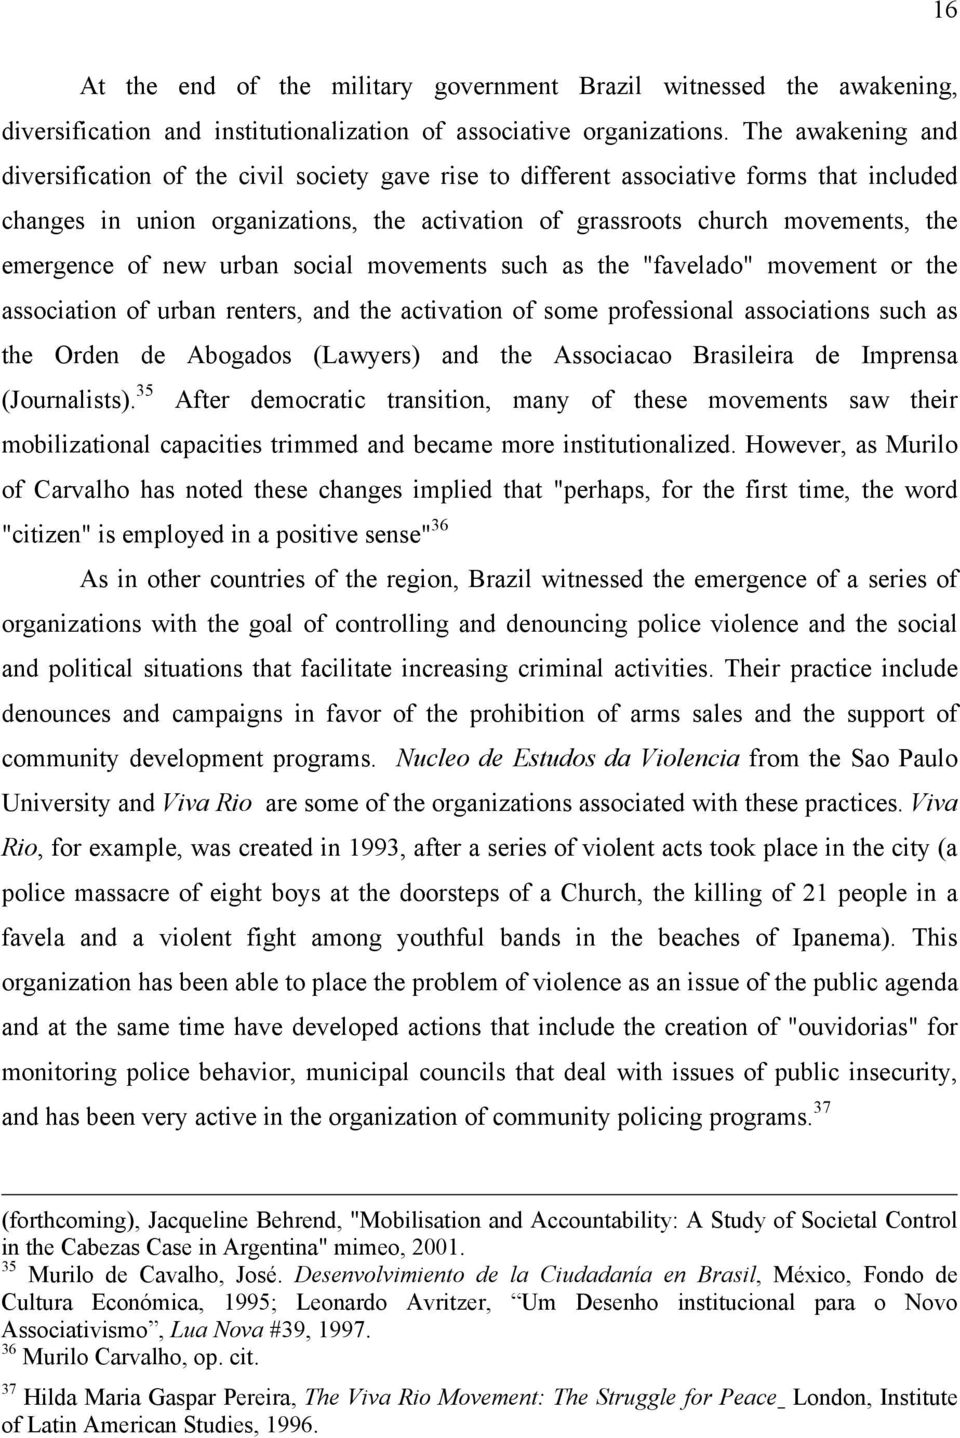 emergence of new urban social movements such as the "favelado" movement or the association of urban renters, and the activation of some professional associations such as the Orden de Abogados